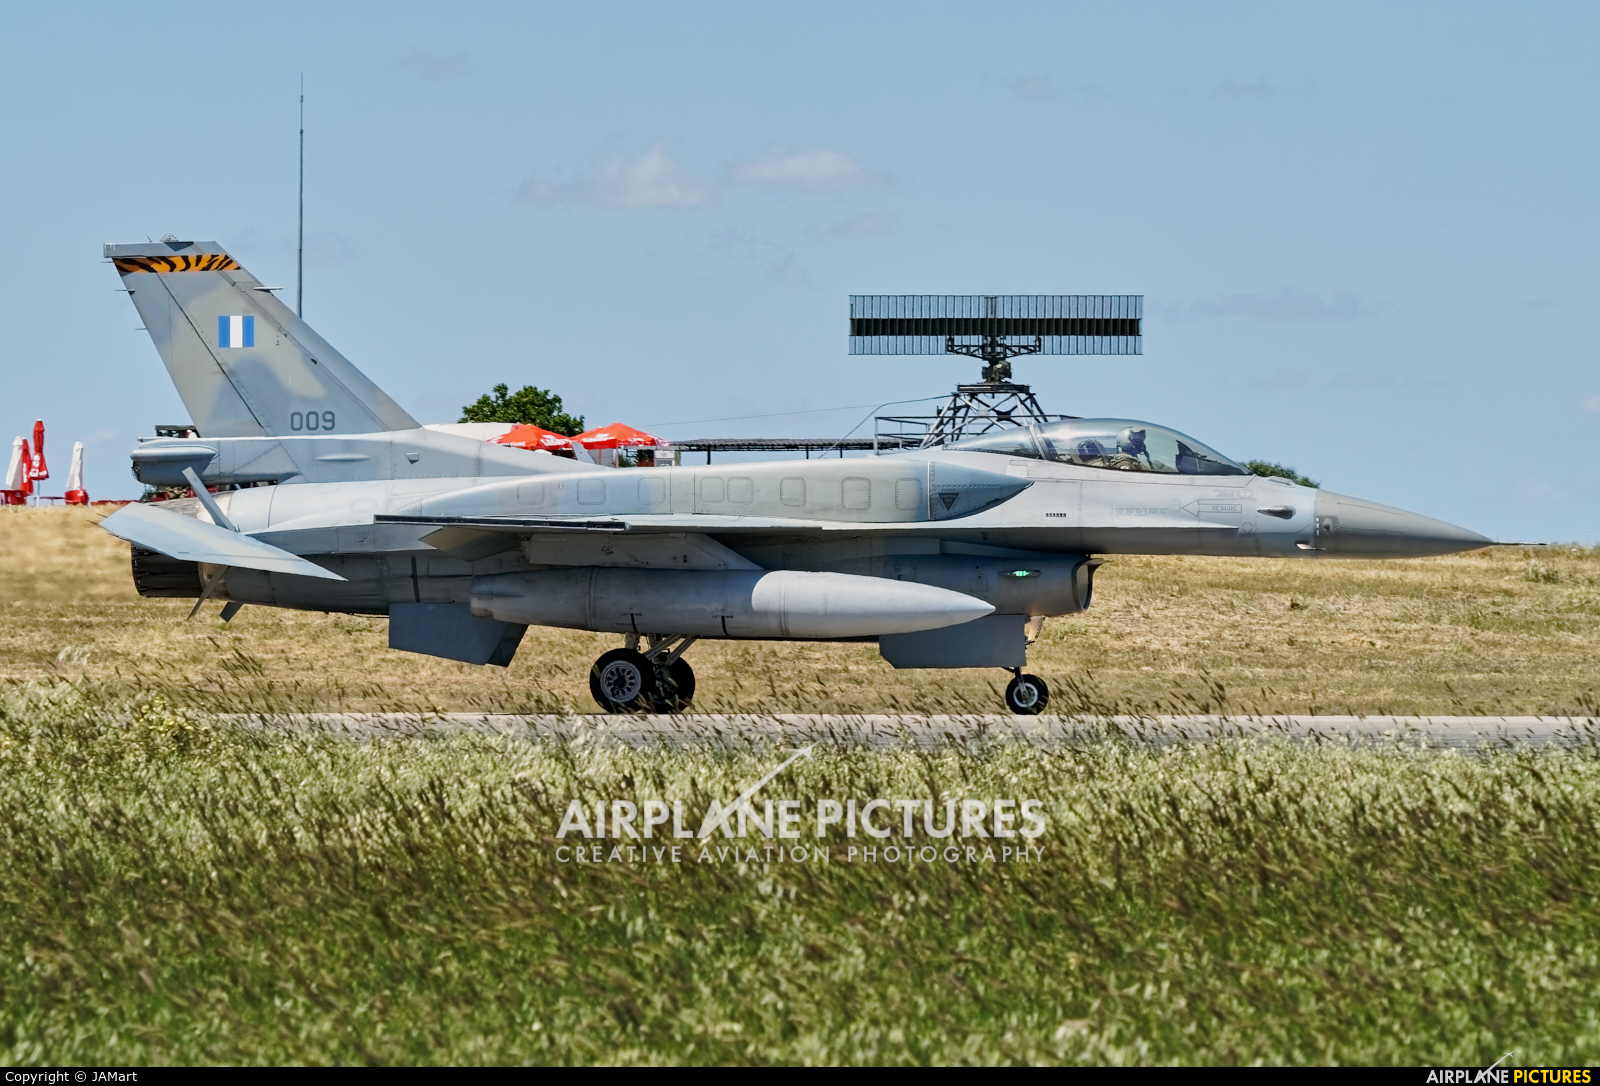 Greece - Hellenic Air Force 009 aircraft at Beja AB